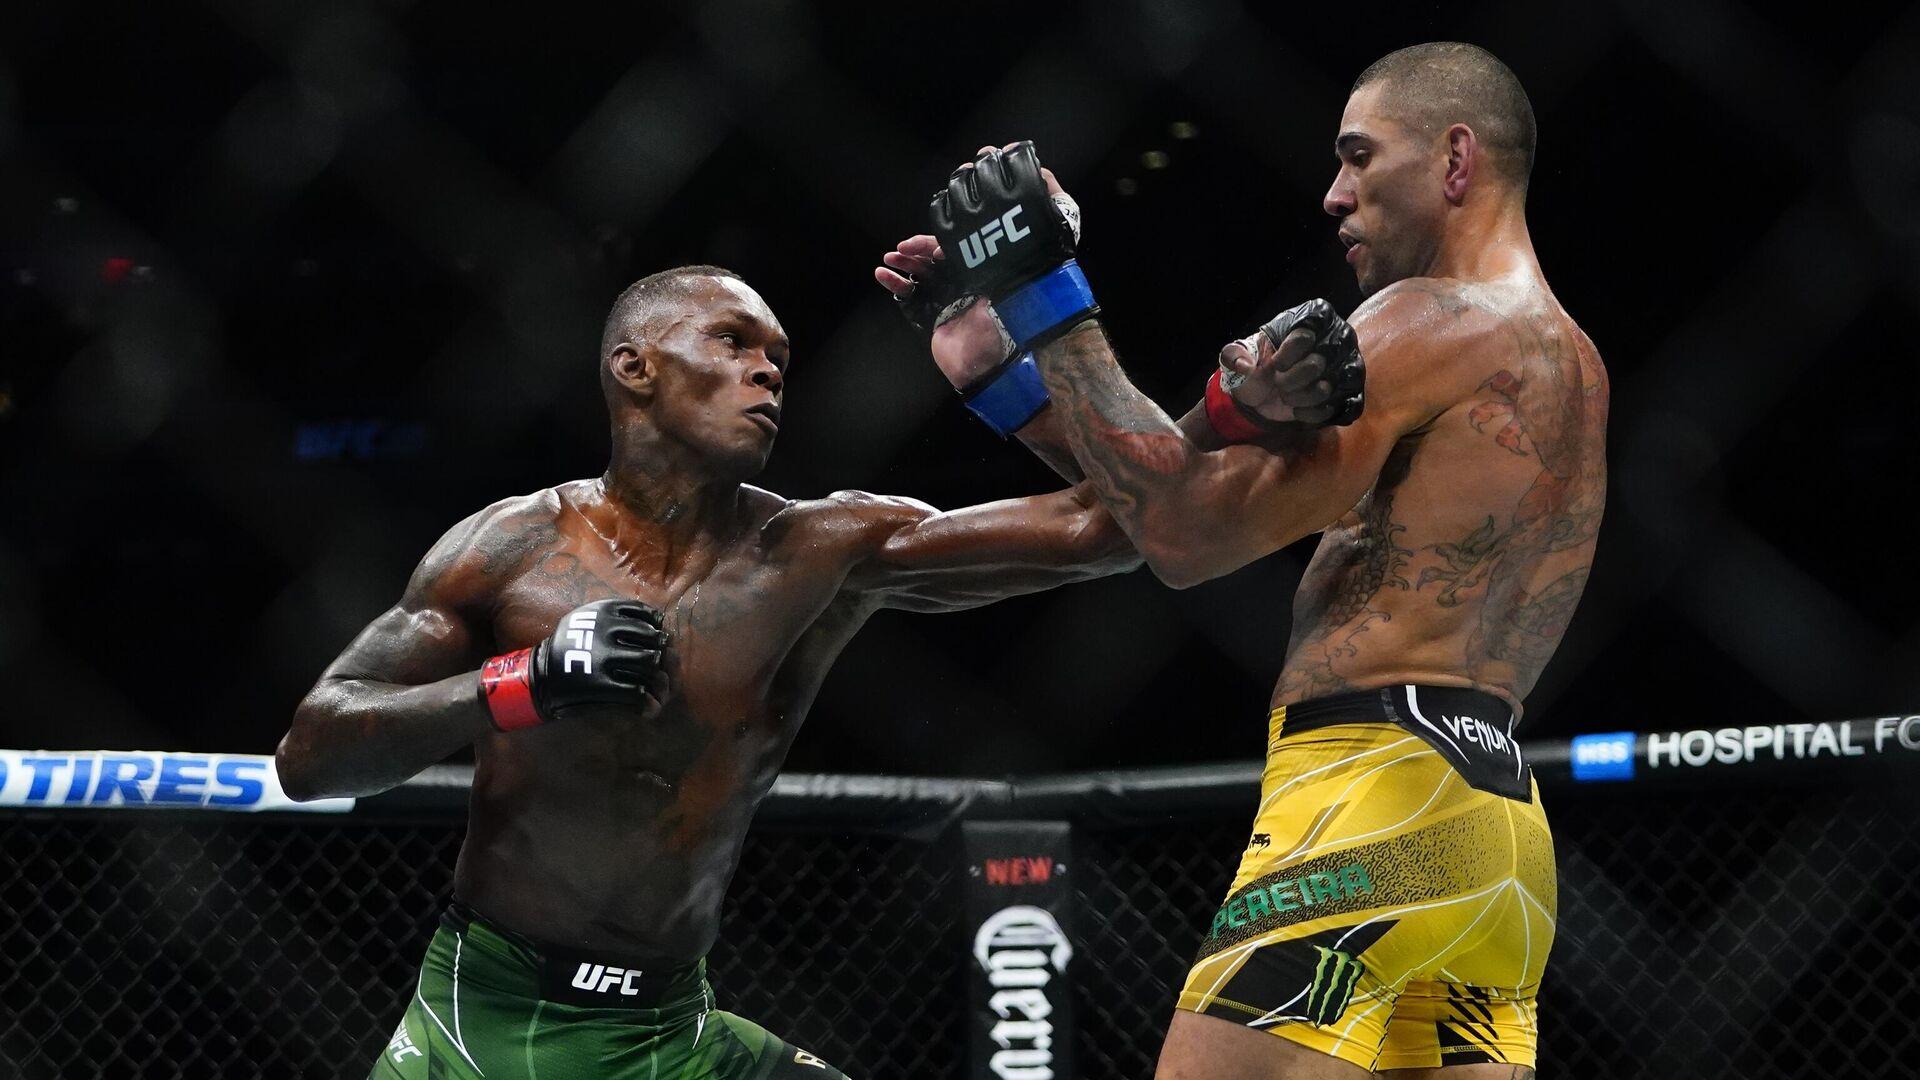 MMA's African fighters are sparking a new era for the sport